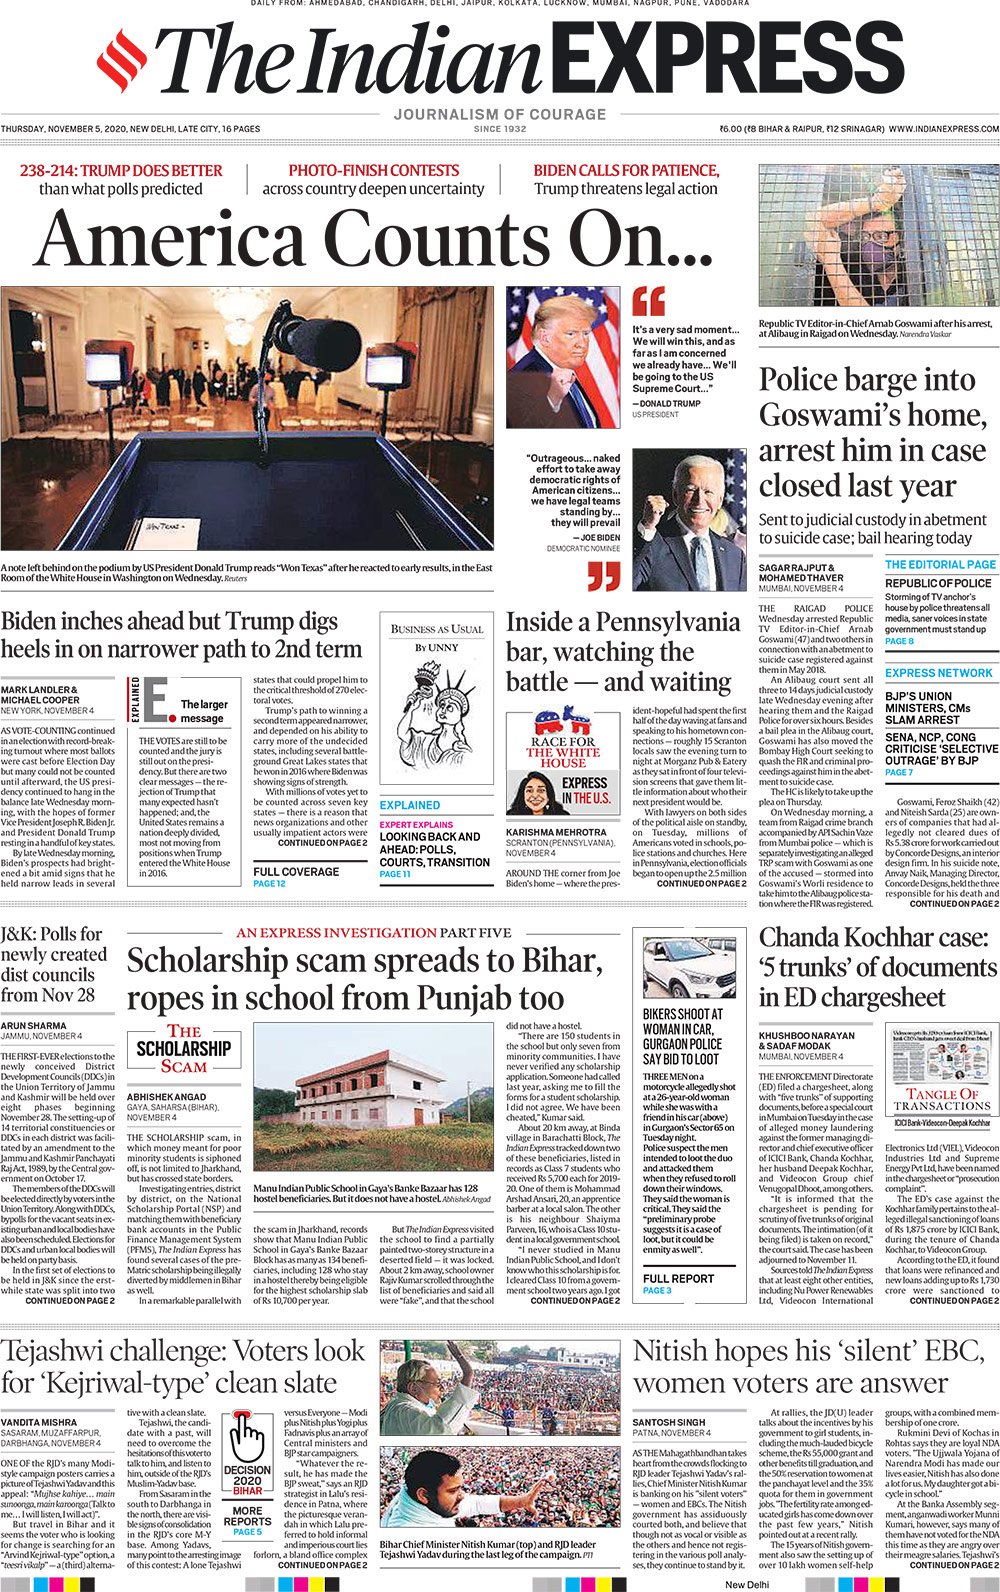 Newspaper Headlines: Tight Race In Key US States To Decide Next President And Other Top Stories